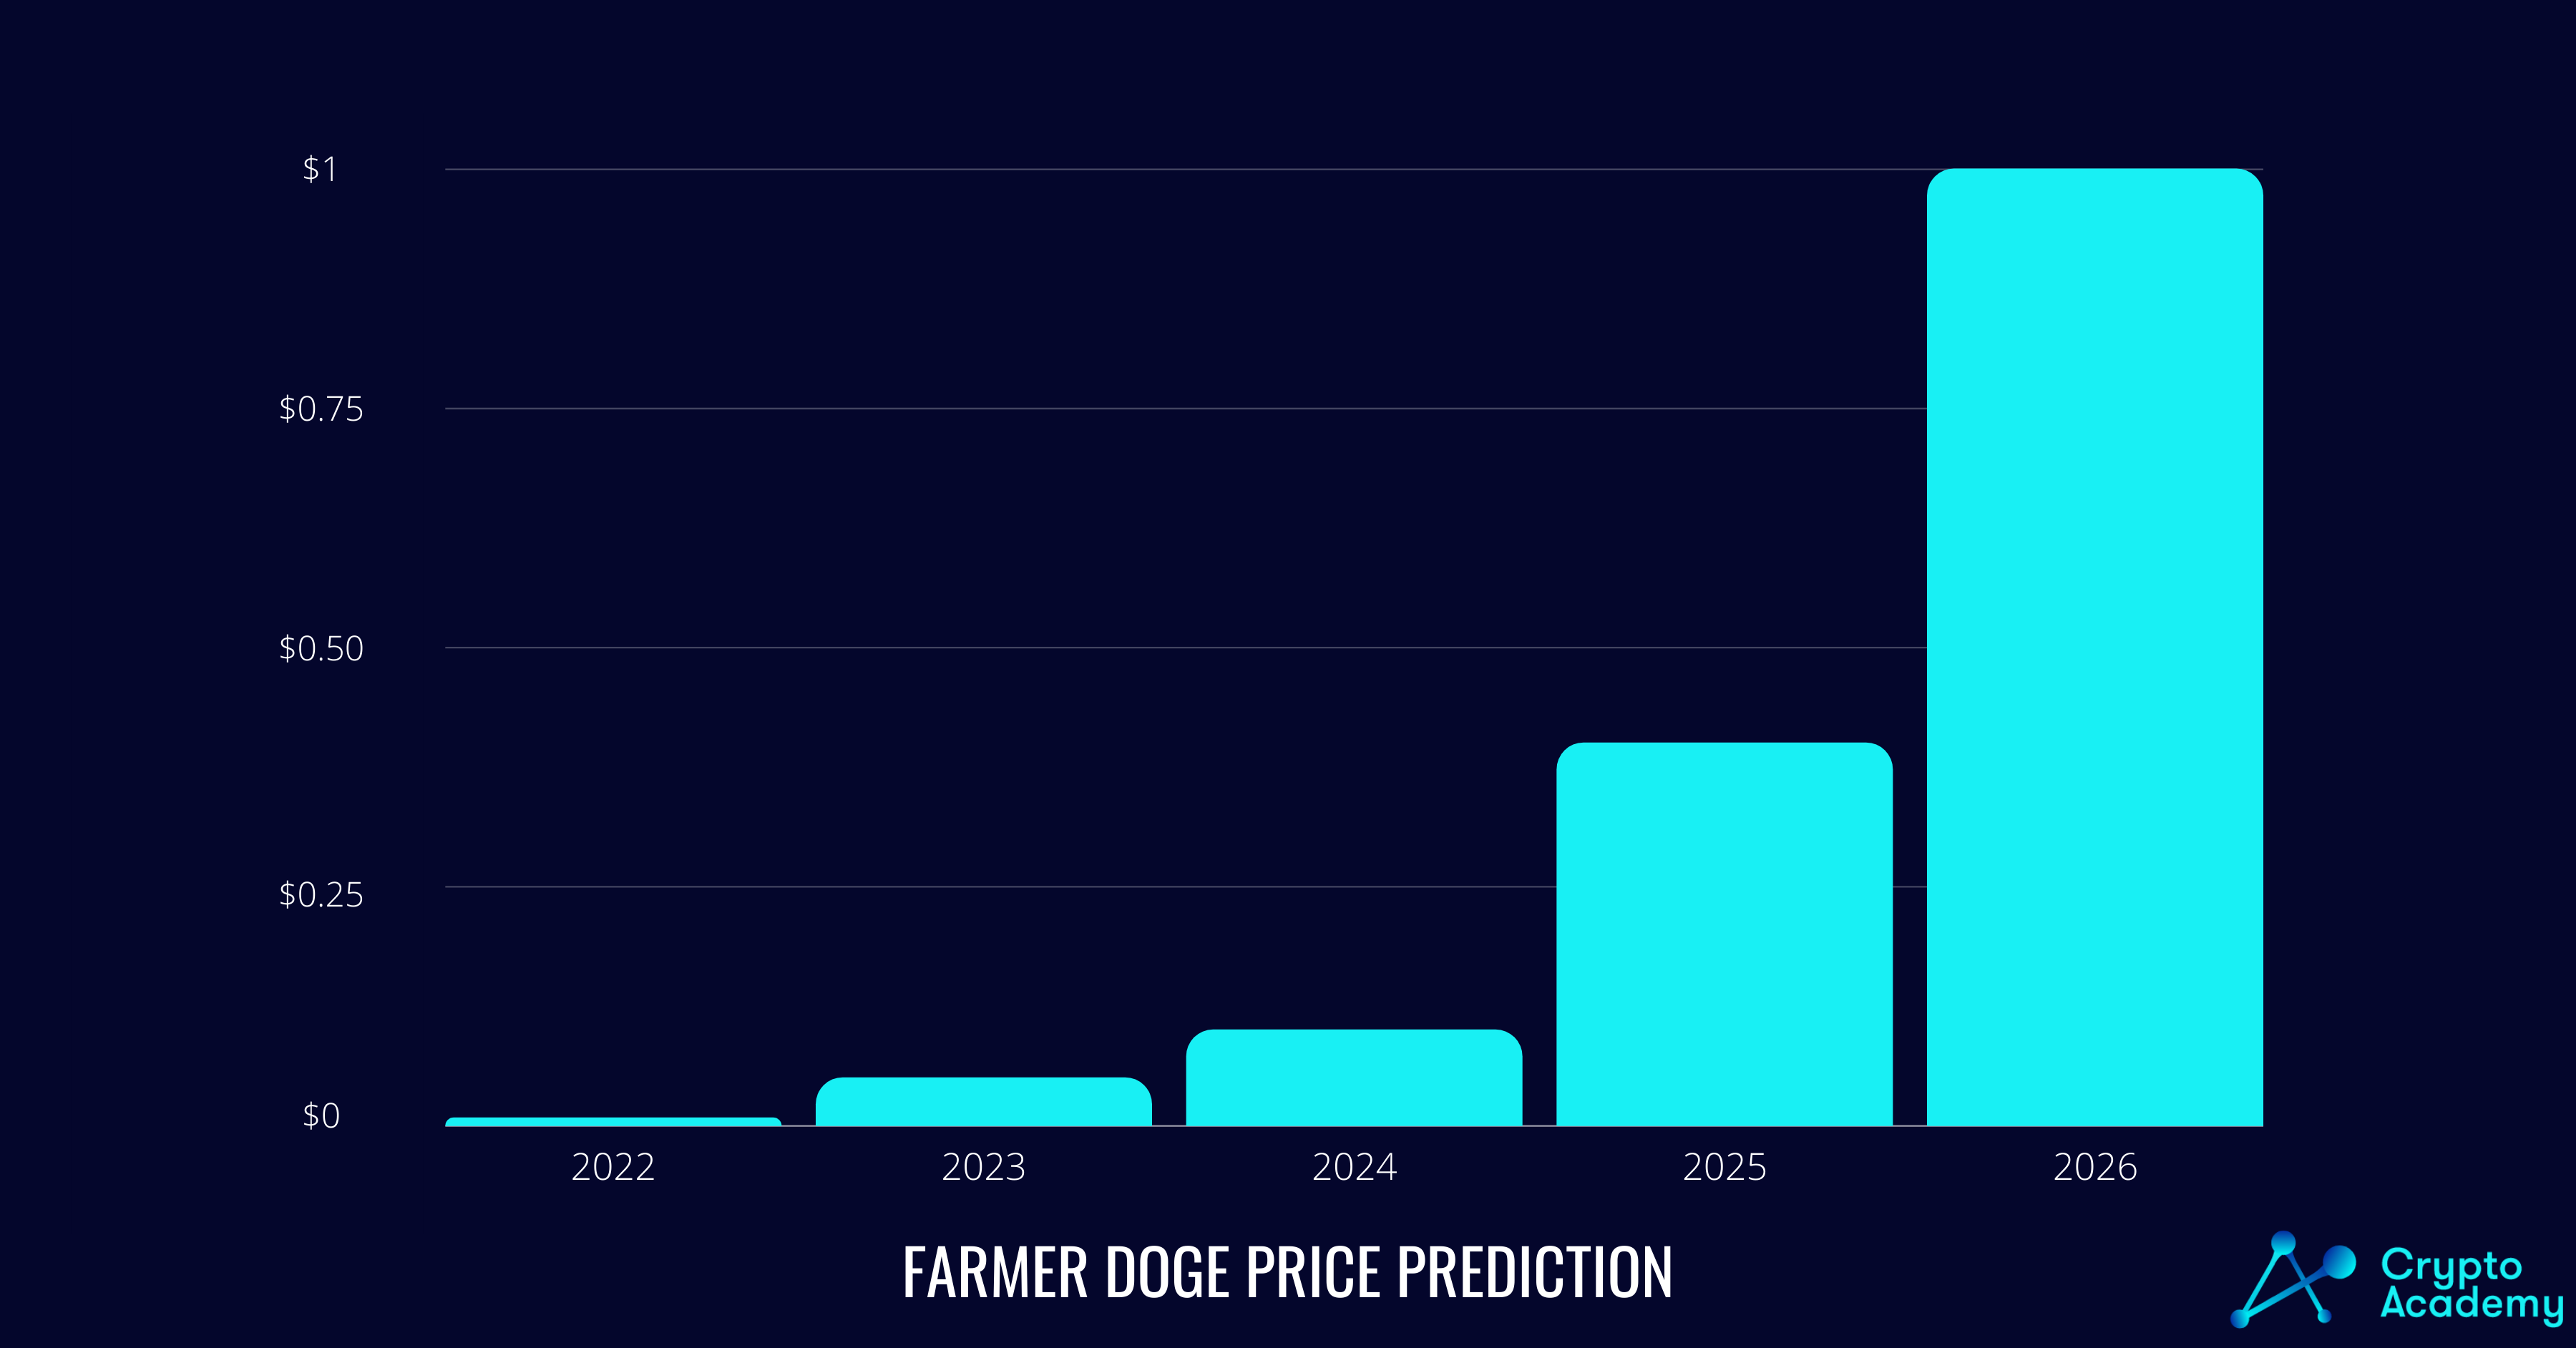 FarmerDoge (CROP) price prediction for the oming years